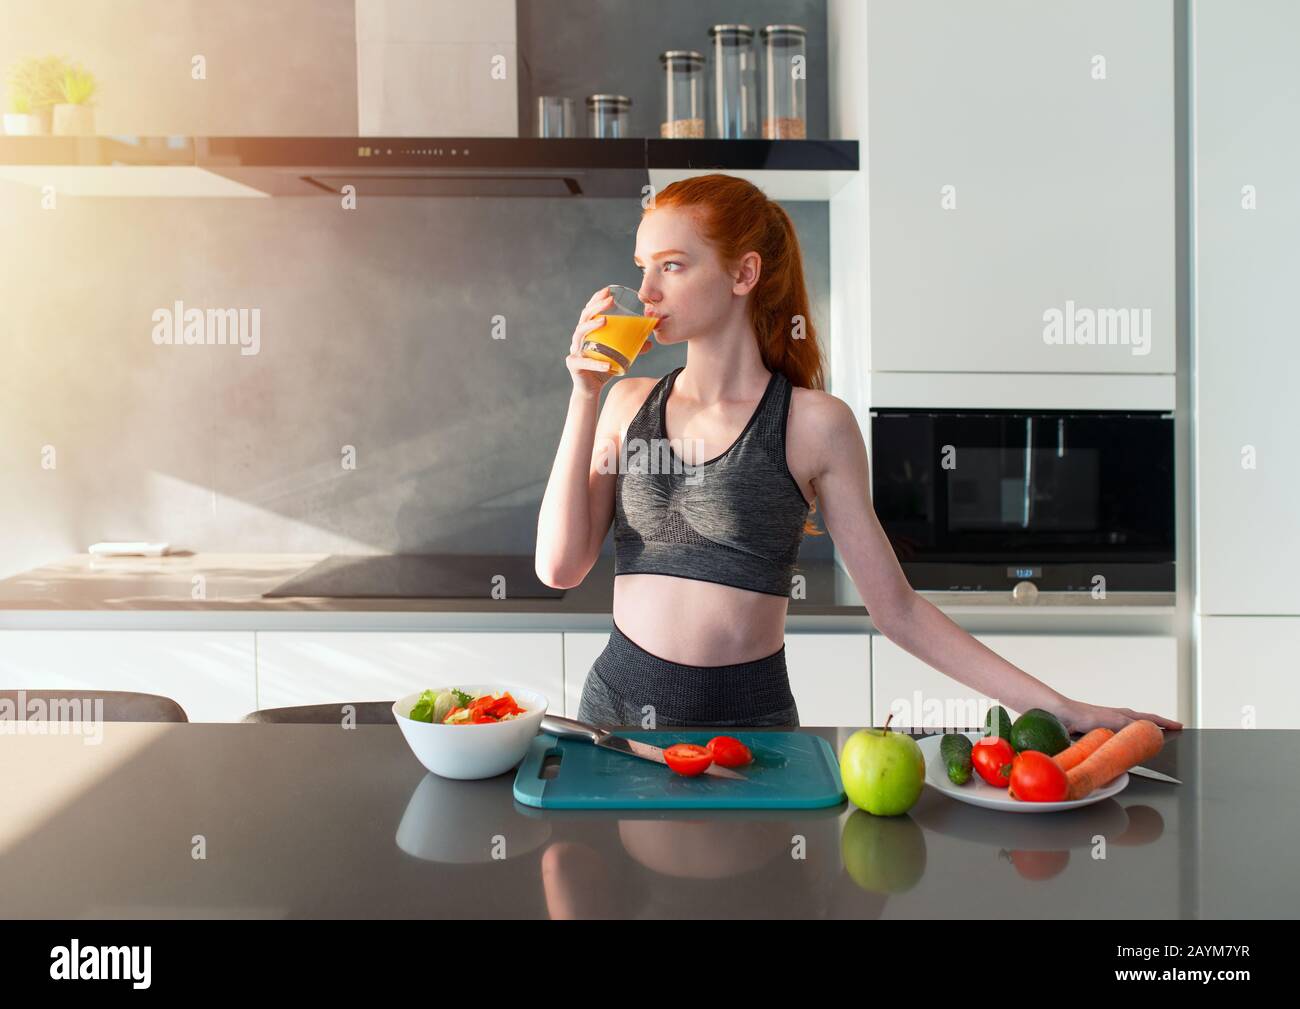 Athletic girl with gym clothes eats fruit in the kitchen Stock Photo